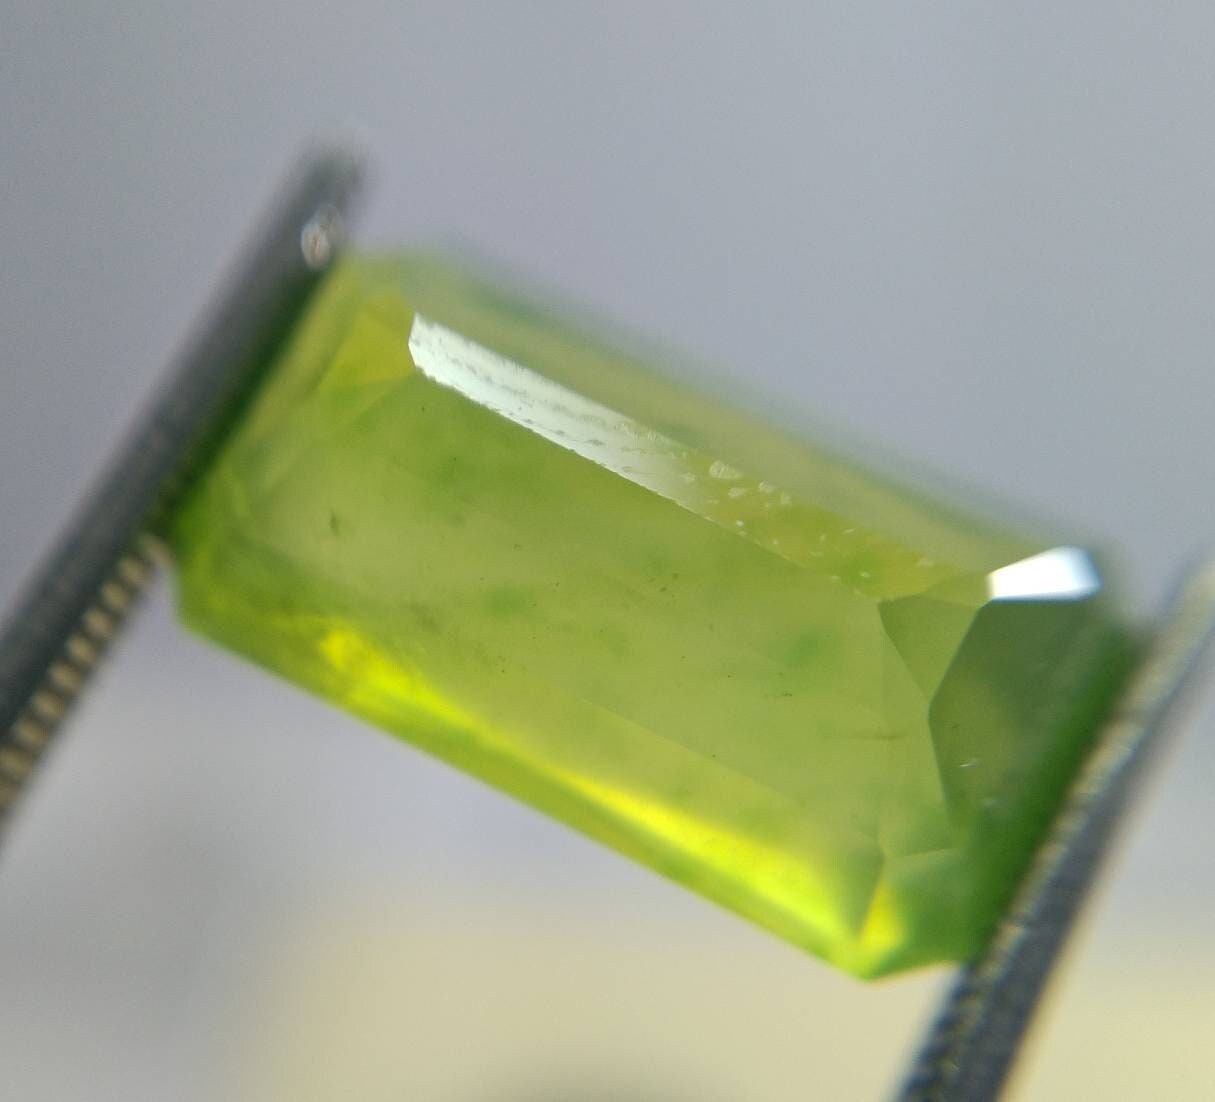 ARSAA GEMS AND MINERALSNatural top quality beautiful 8.5 Carats radiant shape green faceted hydrograssular garnet gem - Premium  from ARSAA GEMS AND MINERALS - Just $25.00! Shop now at ARSAA GEMS AND MINERALS